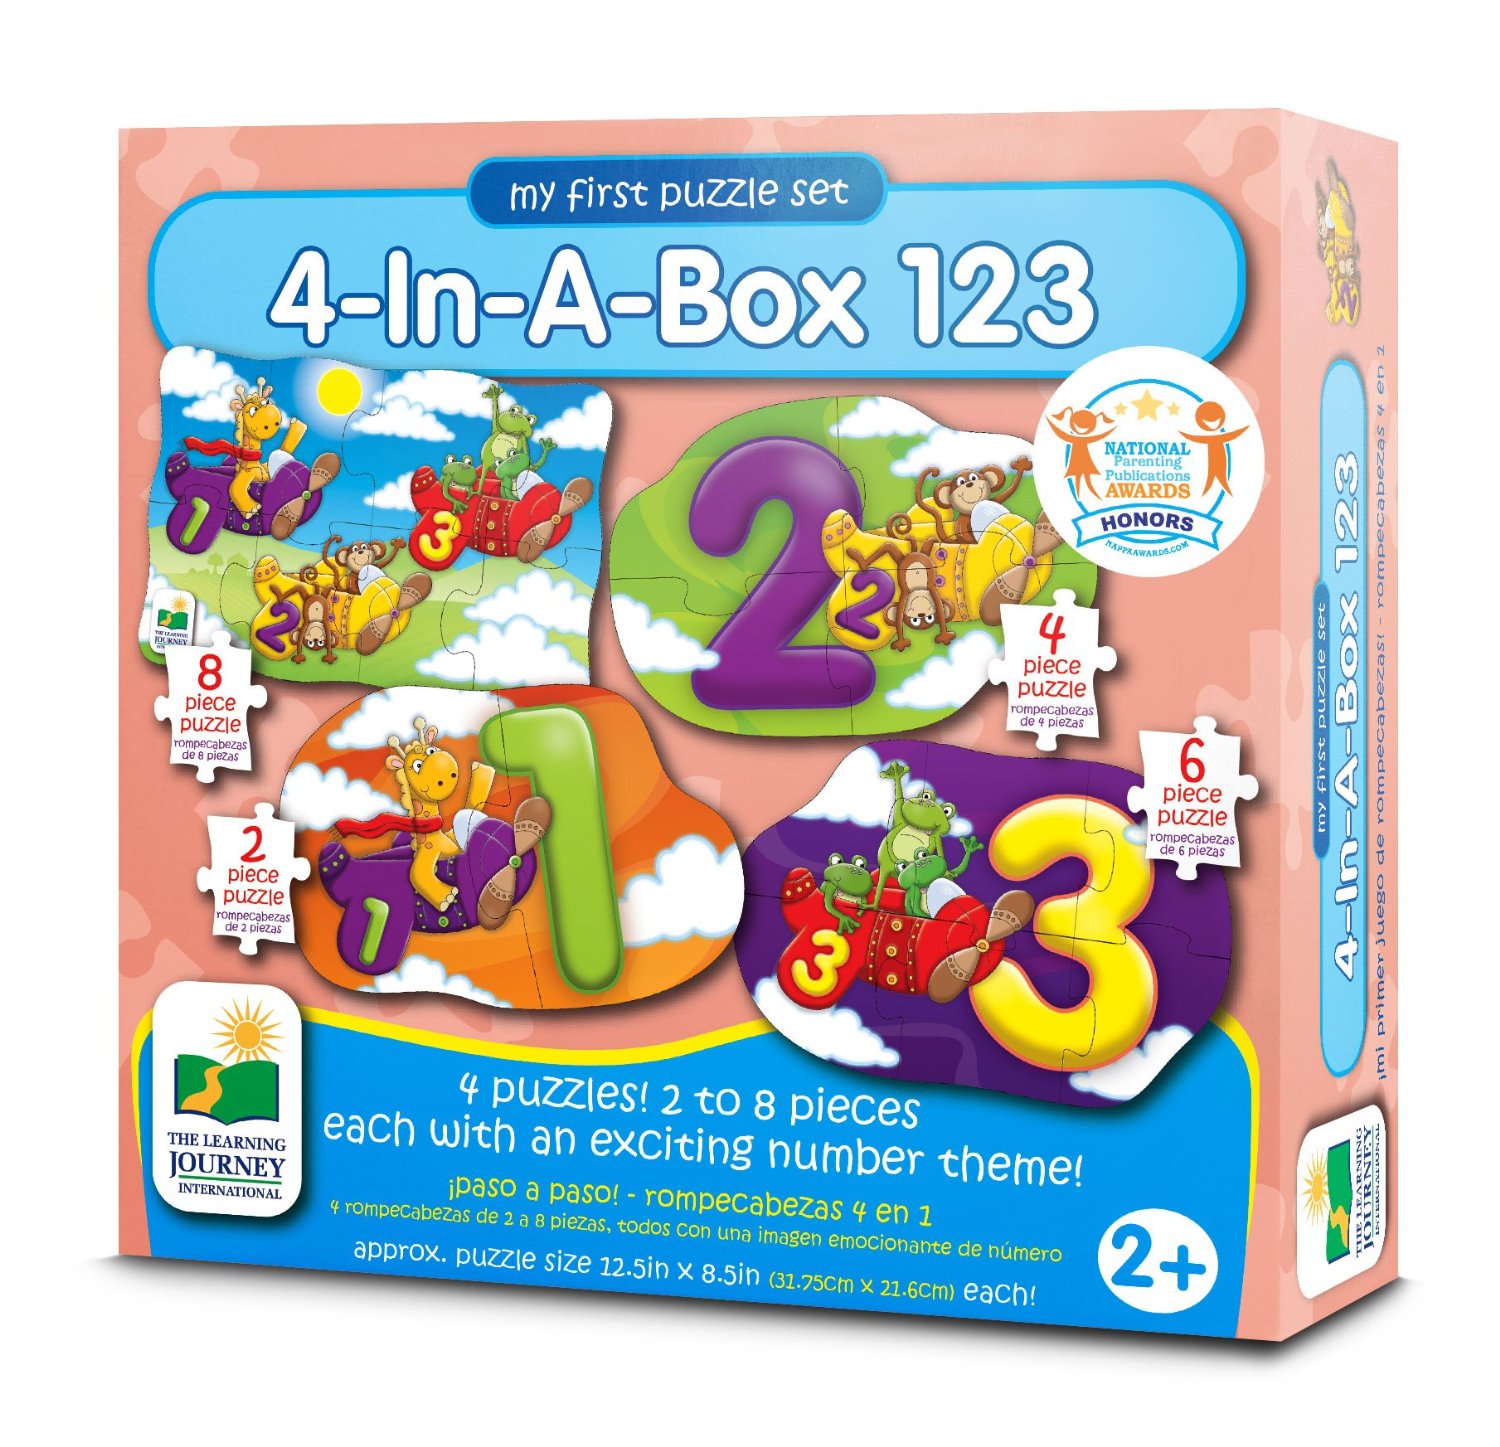 The Learning Journey My First Puzzle Sets 4-In-A-Box Puzzles, 123 or Shapes – Just $5.00!